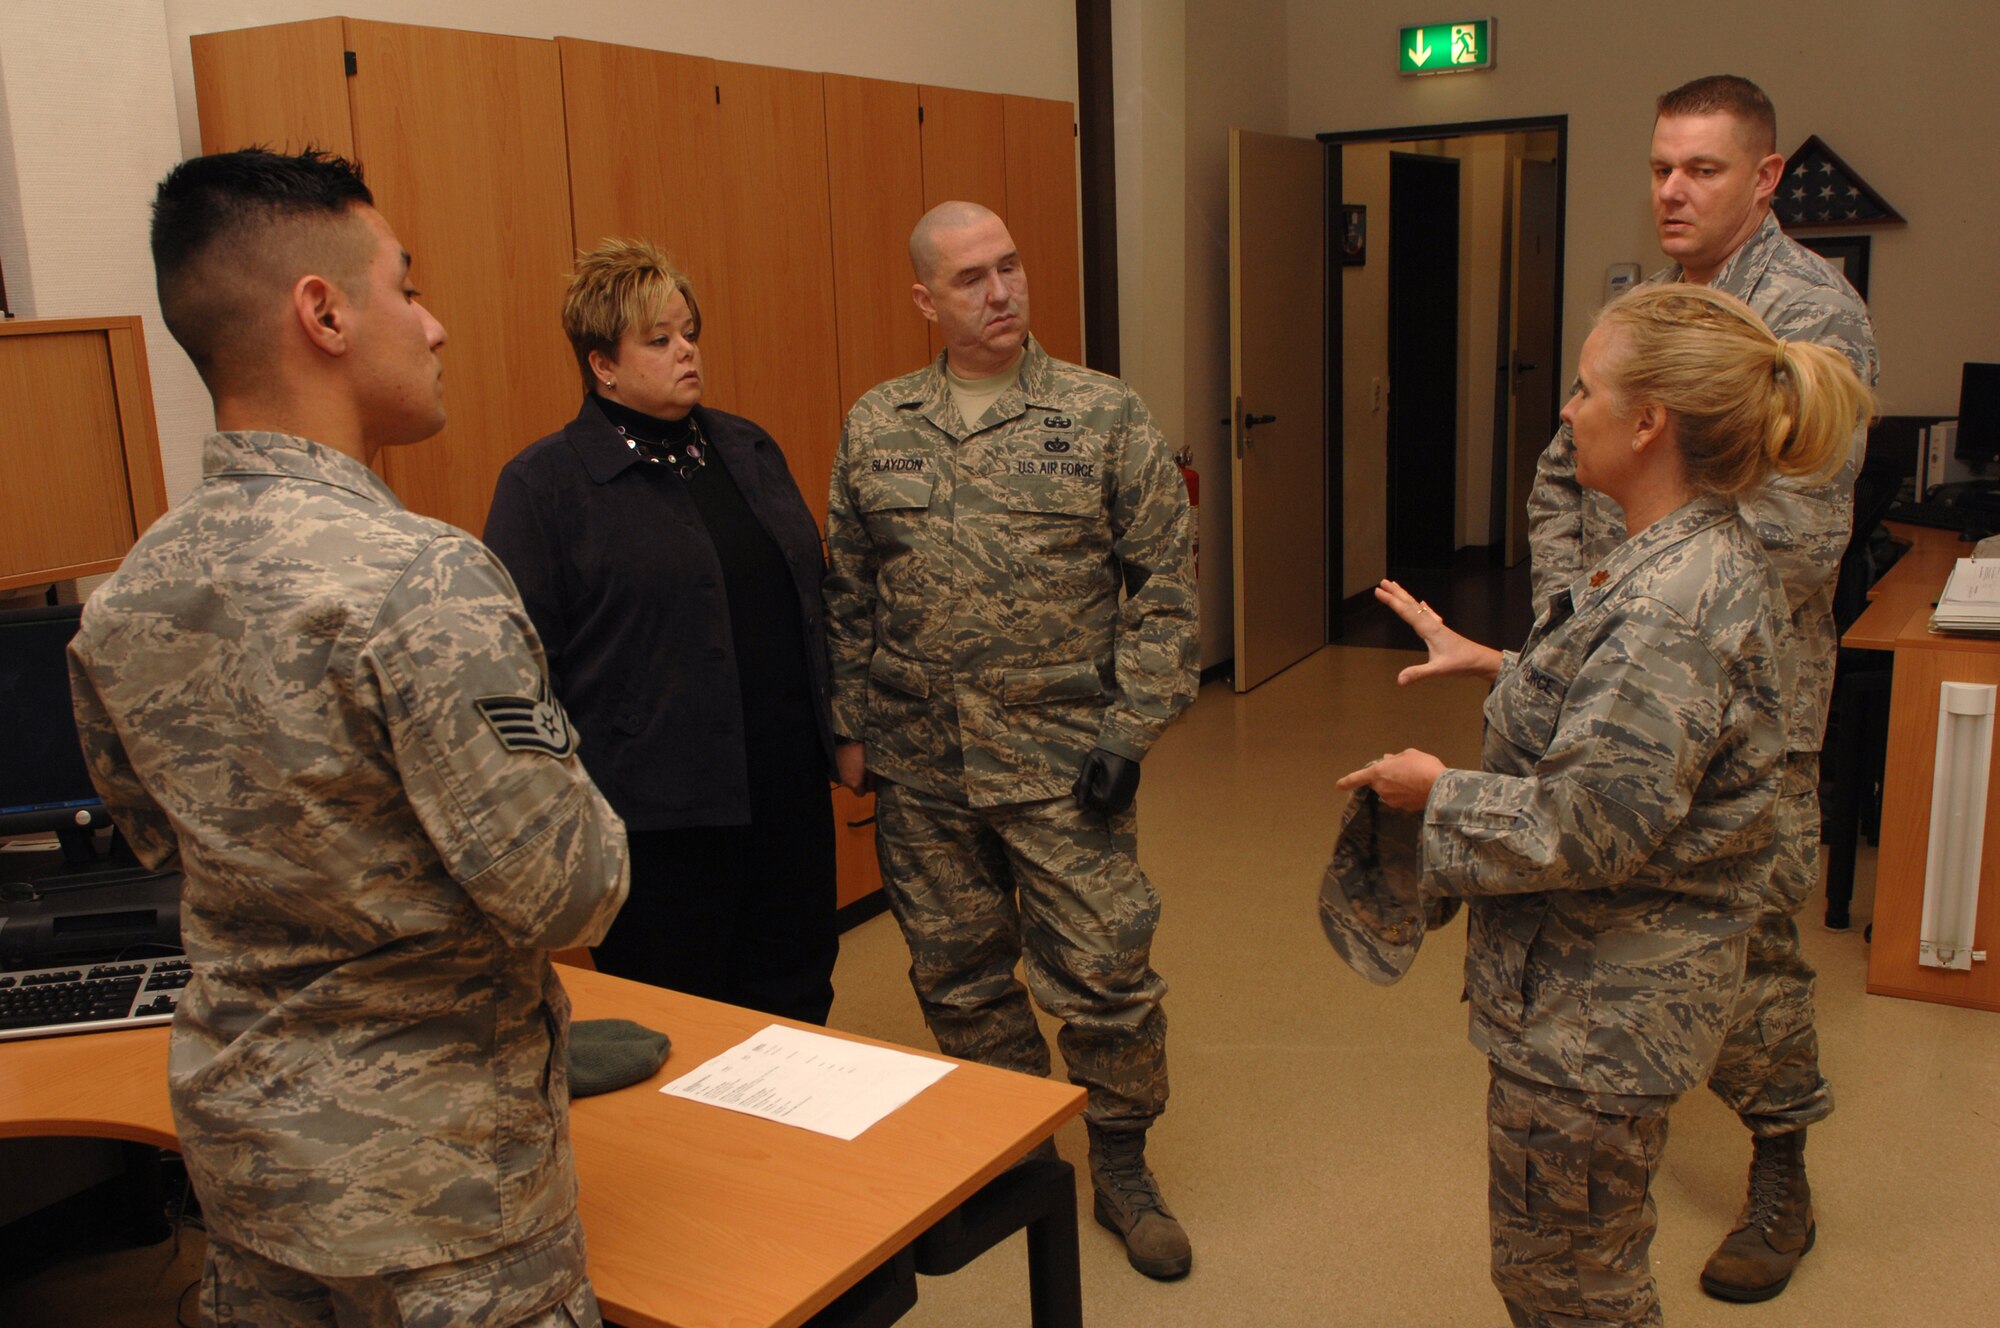 Maj. Laurie Turner (right), 435th Contingency Aeromedical Staging Facility medical service corps officer, and CASF team members, explain the daily operations of the CASF to Staff Sgt. Matthew Slaydon (center) and his wife, Annette, Ramstein Air Base, Germany, Nov. 21, 2008. Sgt. Slaydon was severely injured in Iraq 13 months ago during a deployment there as an explosive ordinance disposal technician and is visiting Ramstein as part of a morale tour, following his recovery. (U.S. Air Force photo by Airman 1st Class Tony R. Ritter)